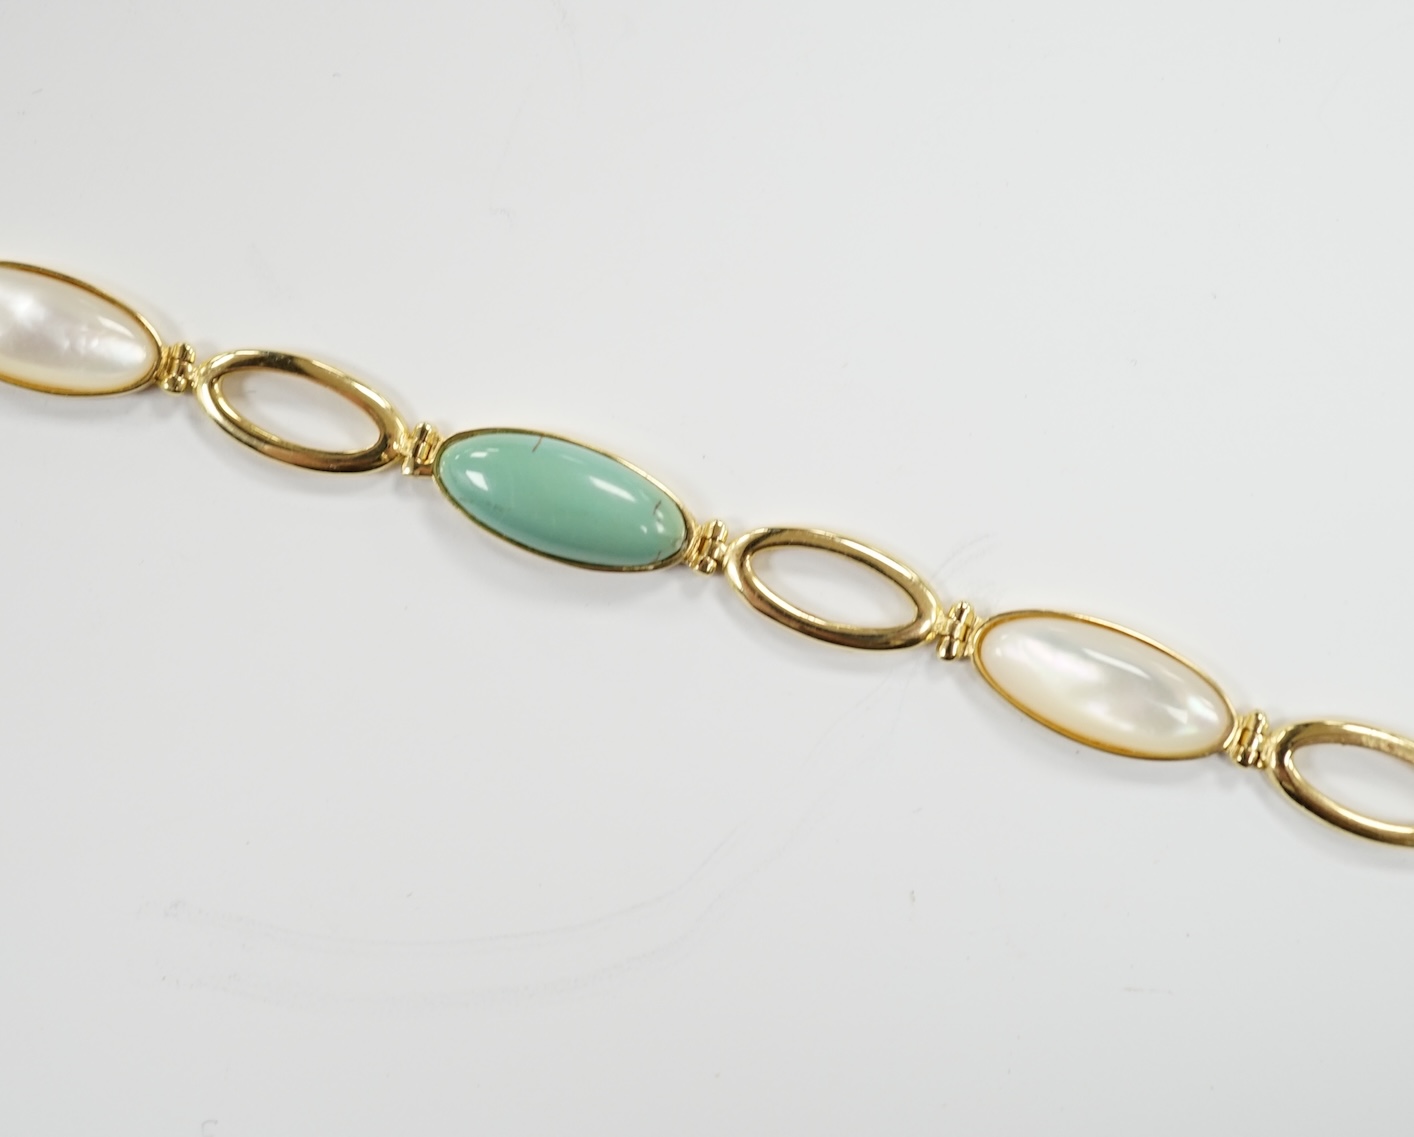 A modern 14k, mother of pearl and turquoise set bracelet, 18cm, gross weight 6.2 grams. moonstone and 14k bracelet